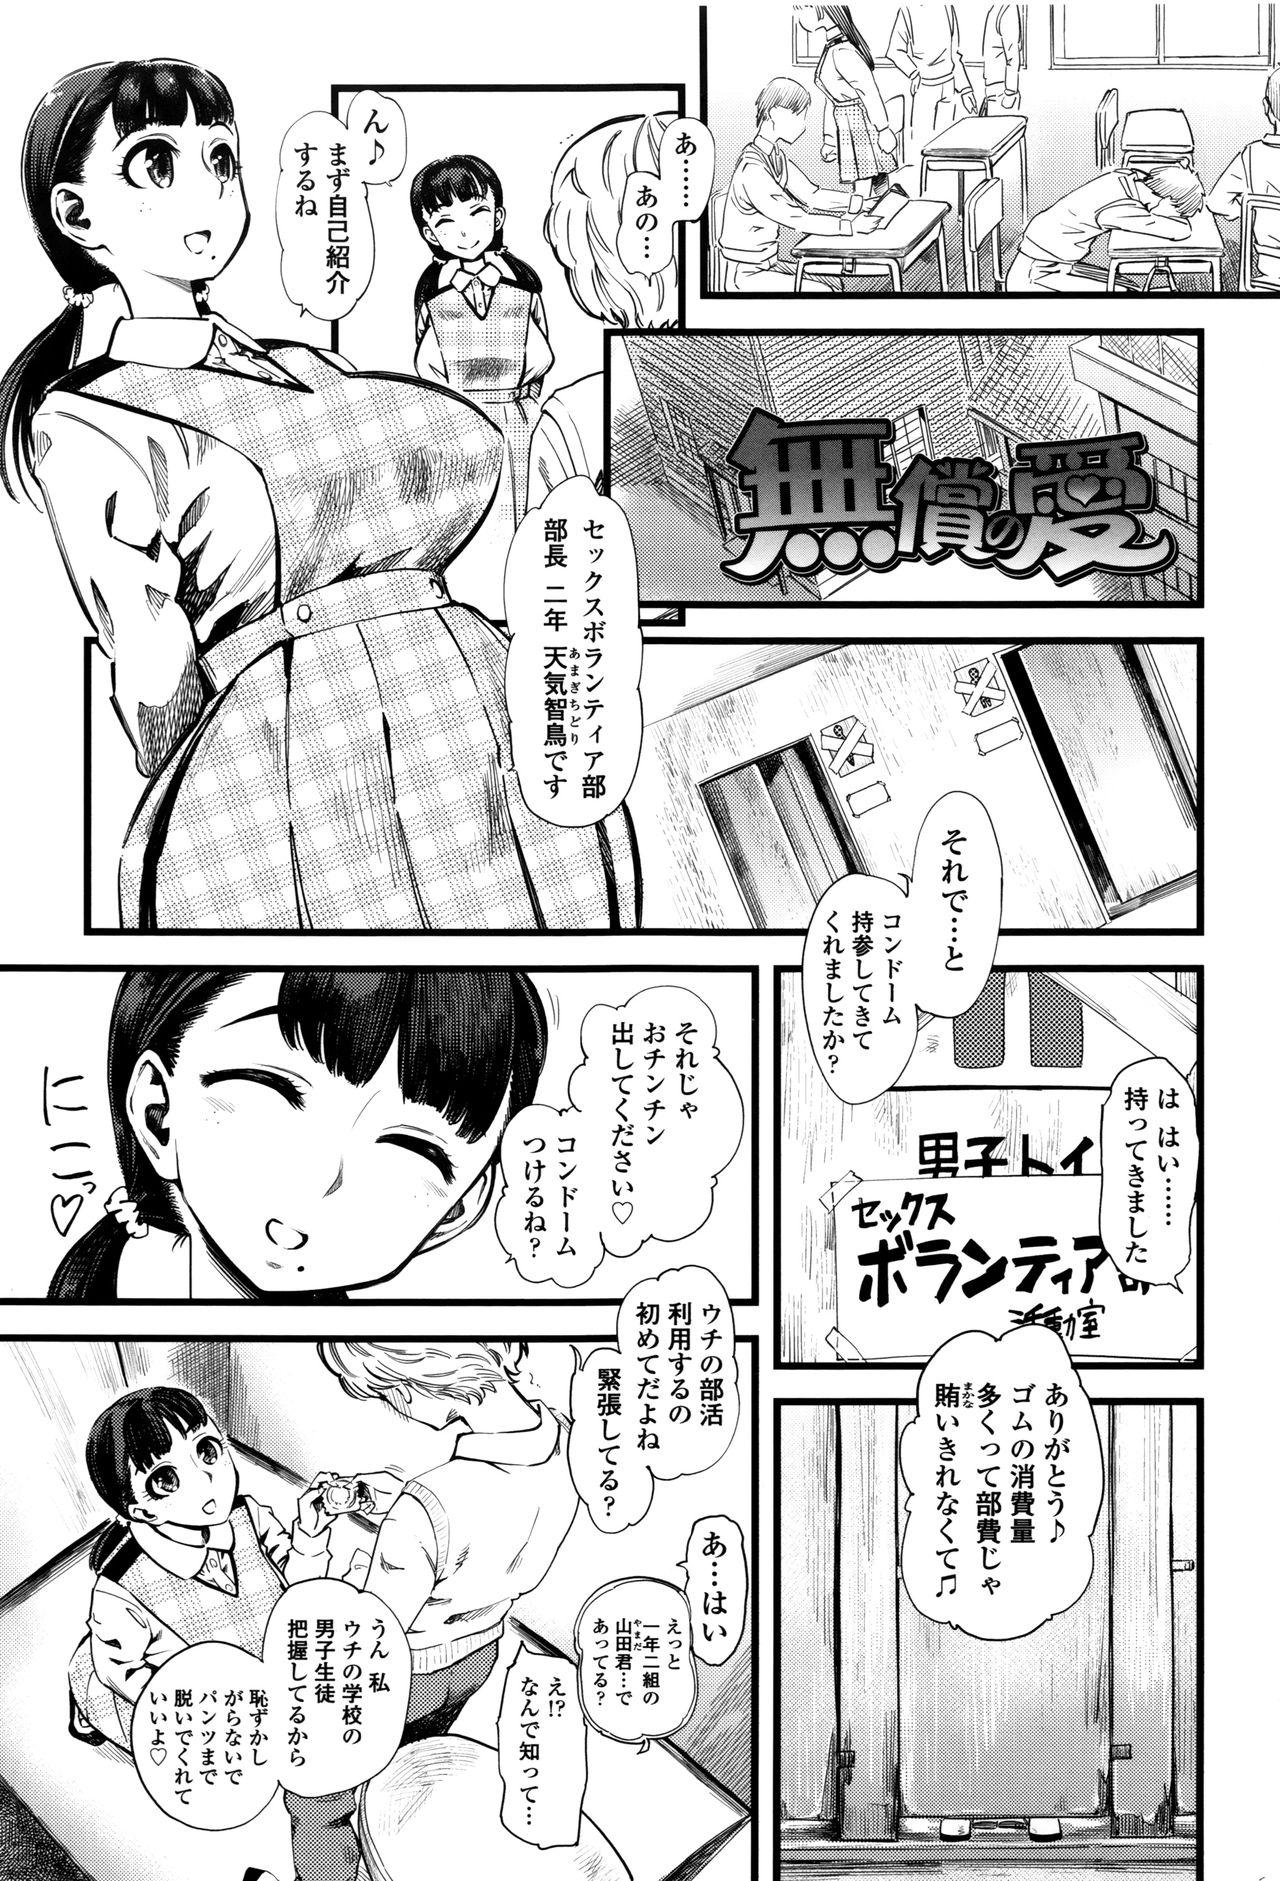 Stripping F×M Female×Male Longhair - Page 4